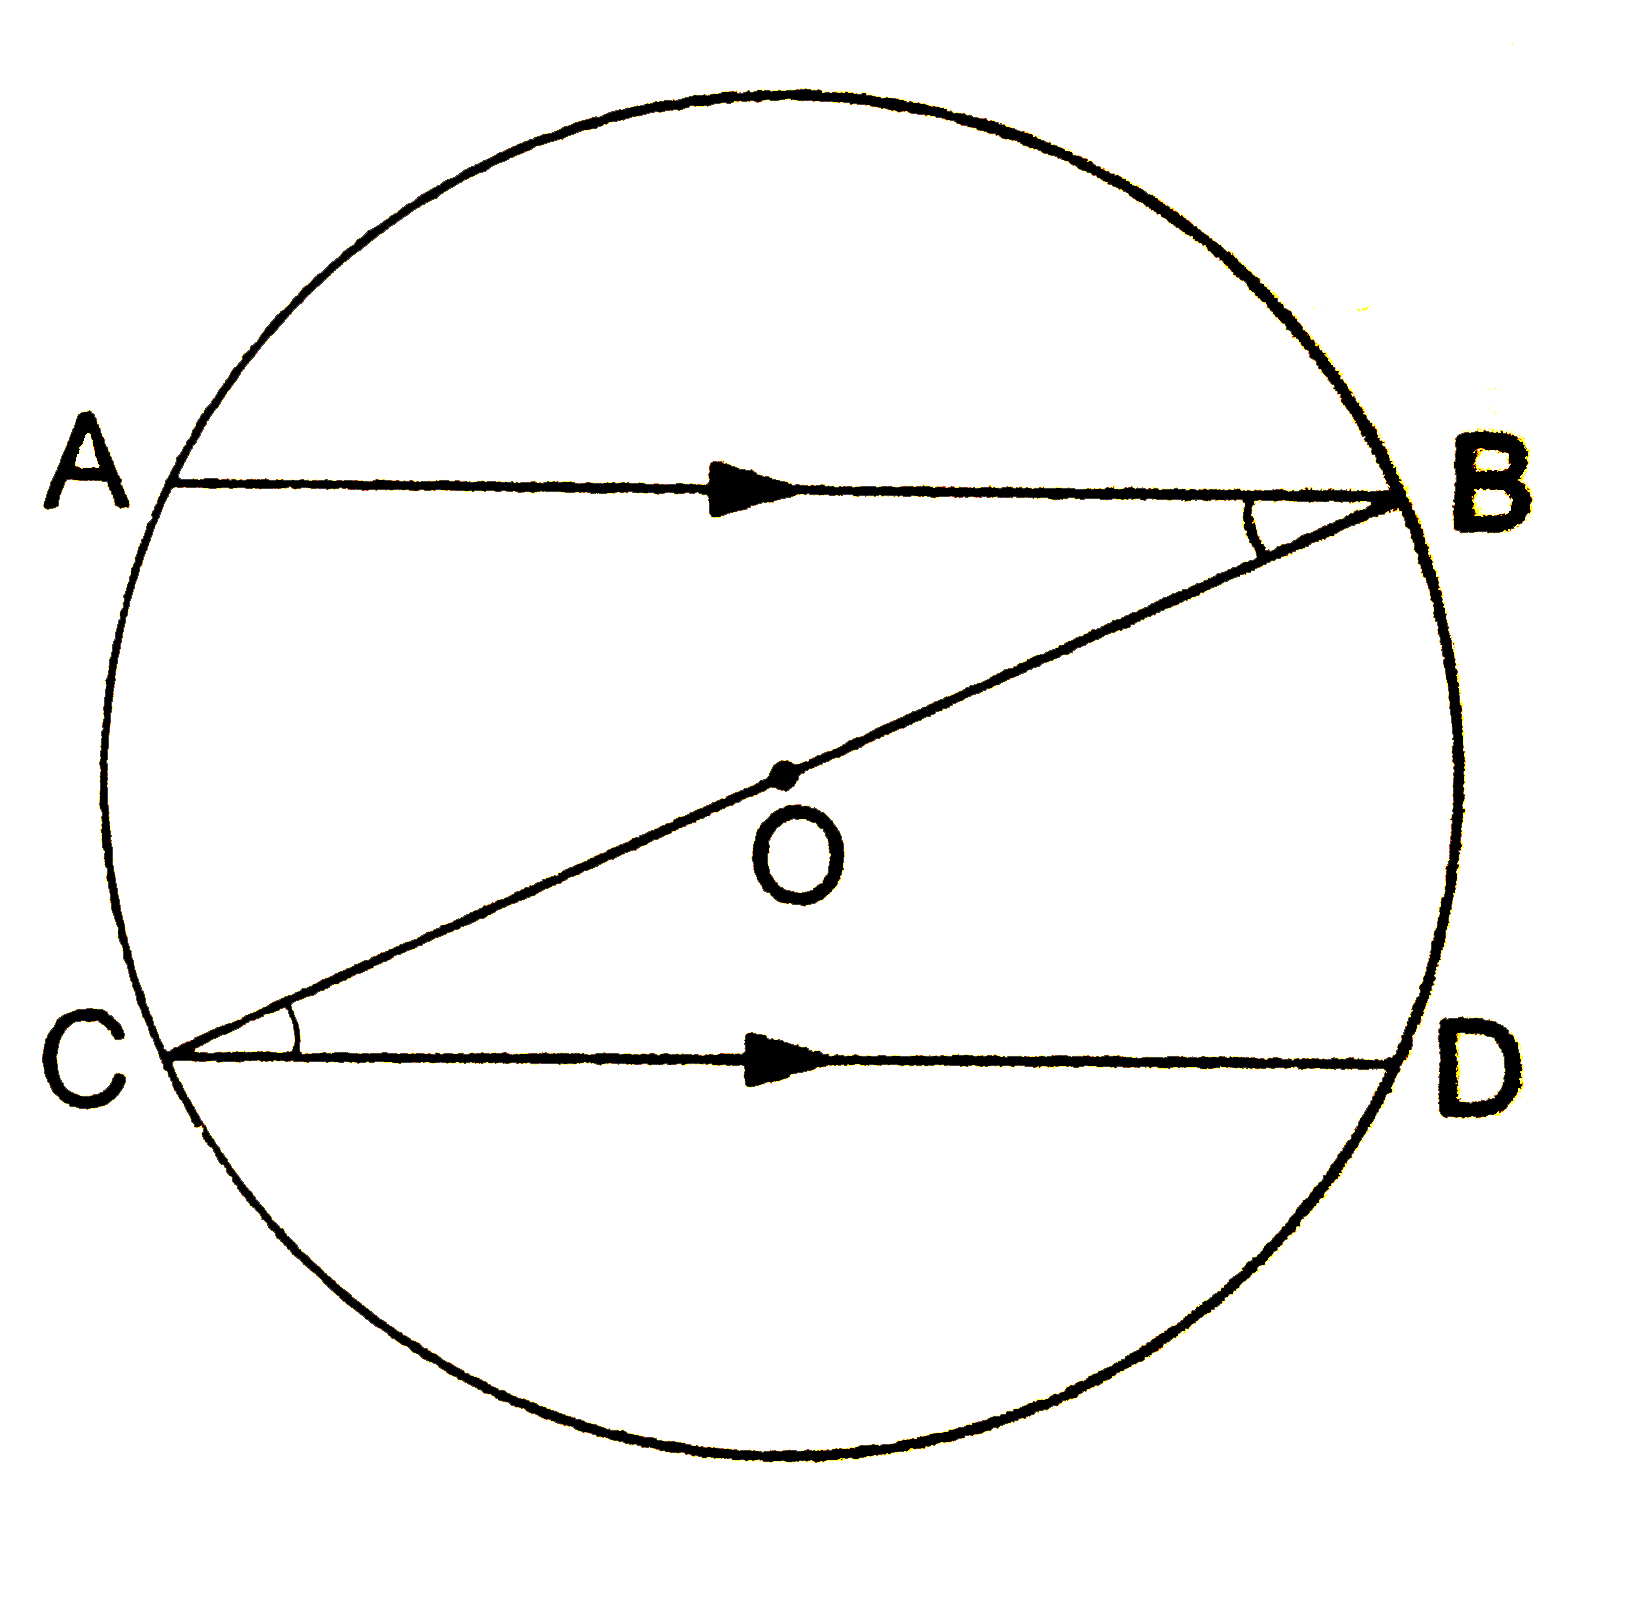 In the adjoining figure, BC is a diameter of a circle with centre O. If AB and CD are two chords such that AB || CD, prove that  AB=CD